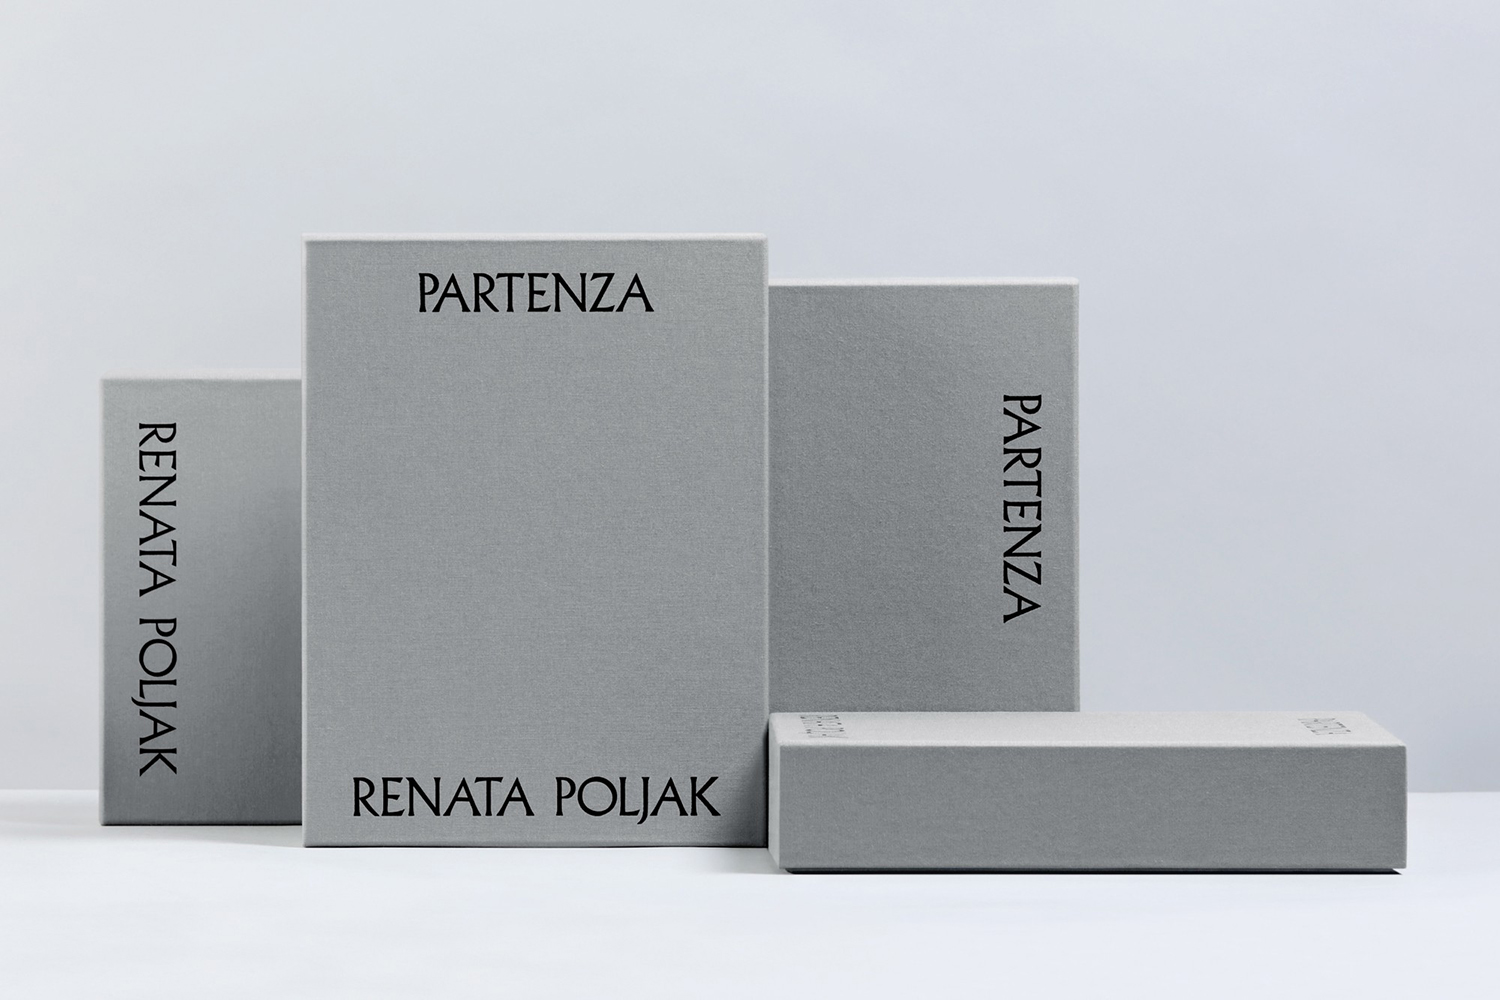 Limited edition packaging by Bunch for Partenza by Renata Poljak